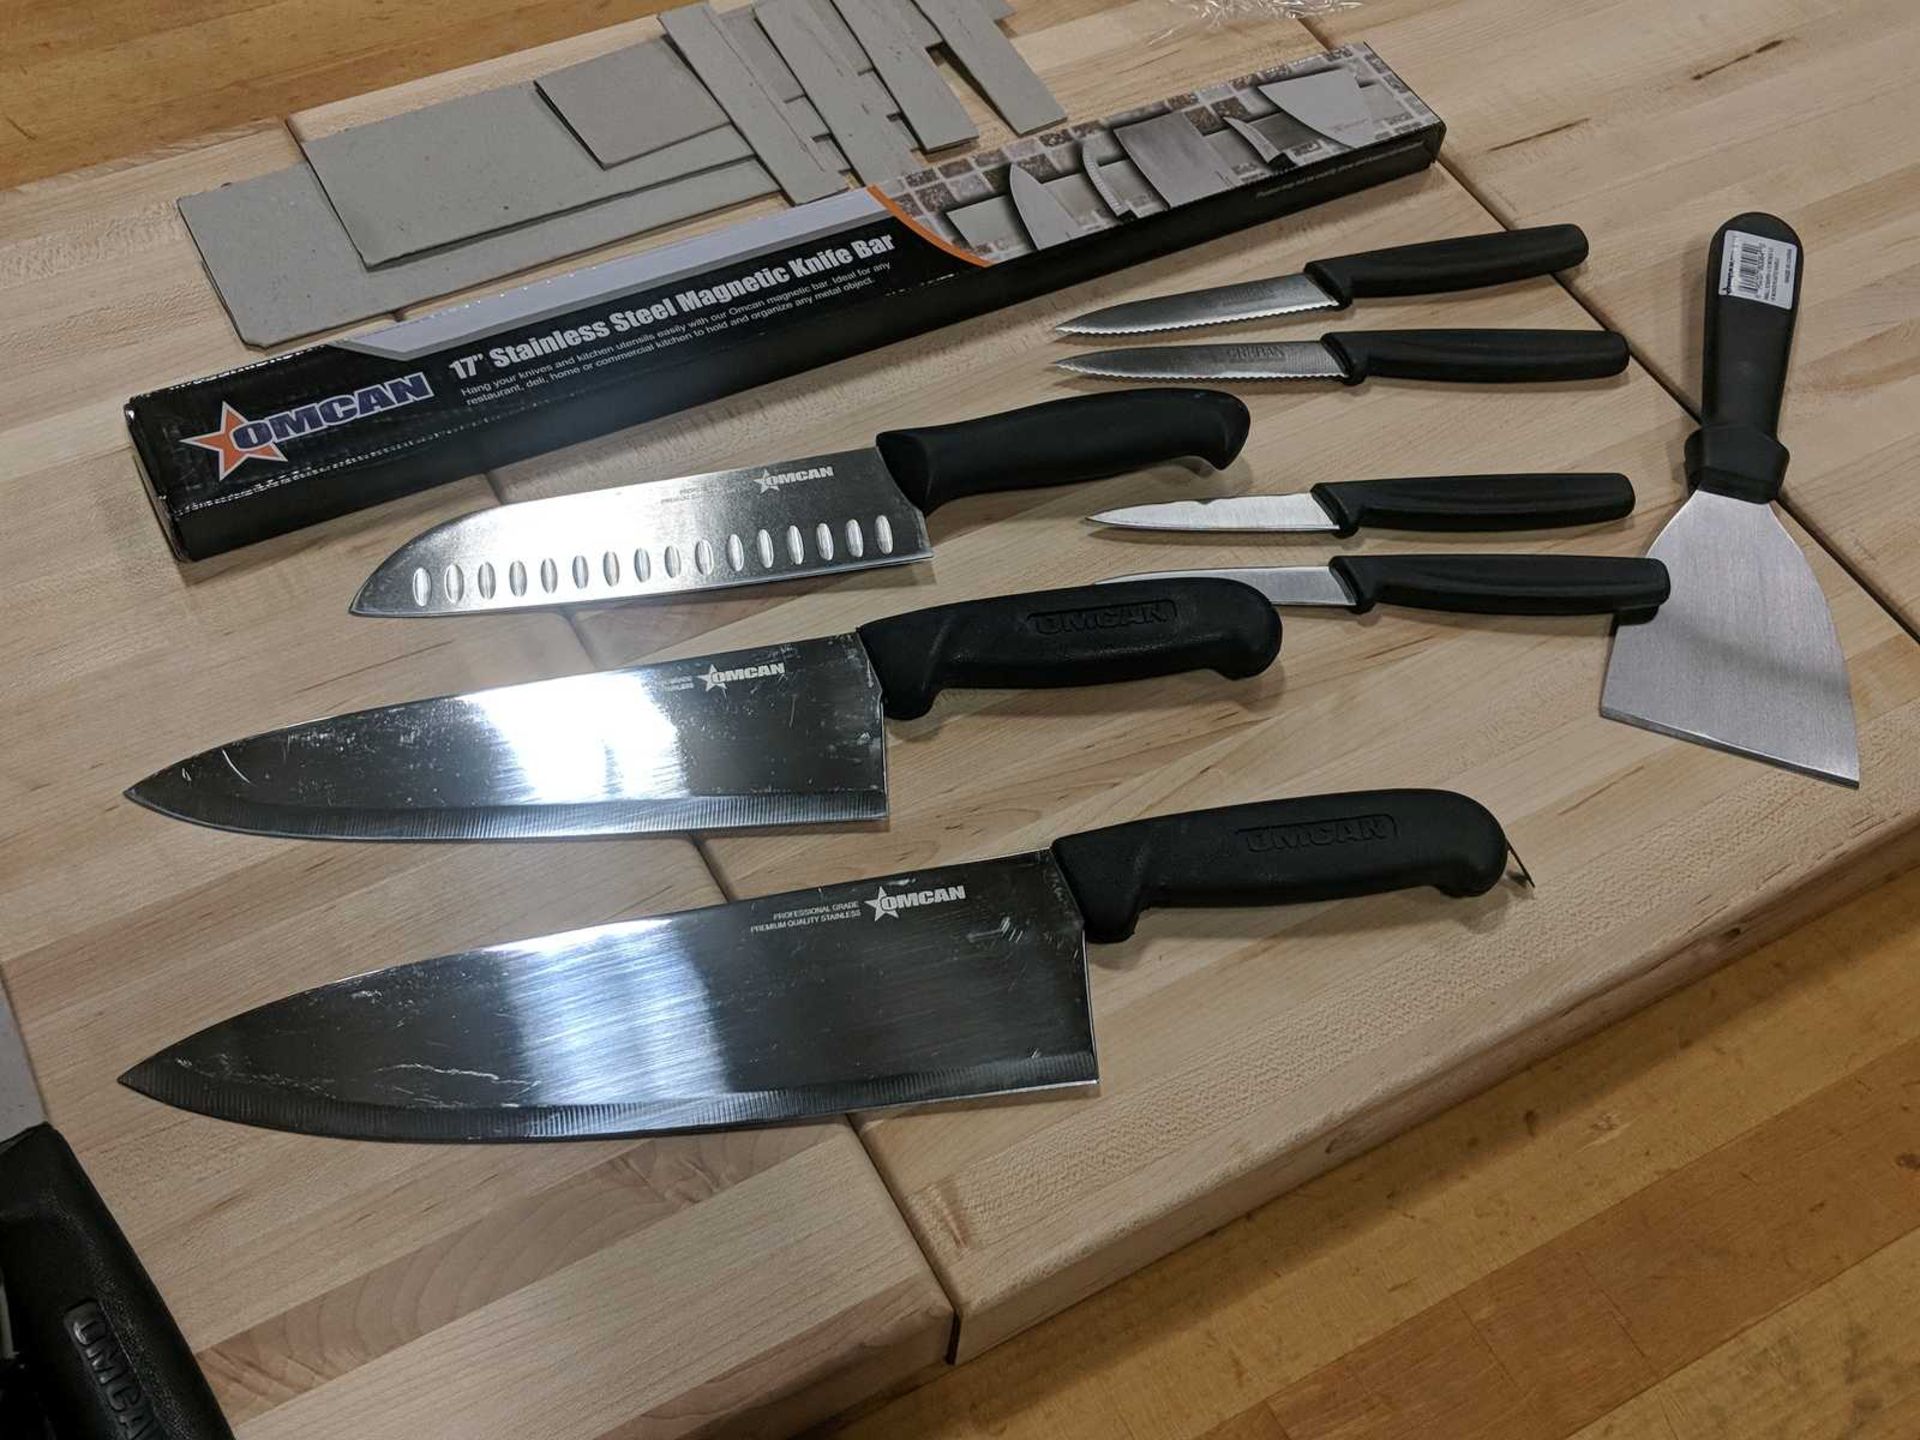 Misc Knives & Scraper with 17" Magnetic Tool Bar - Lot of 9 Pieces